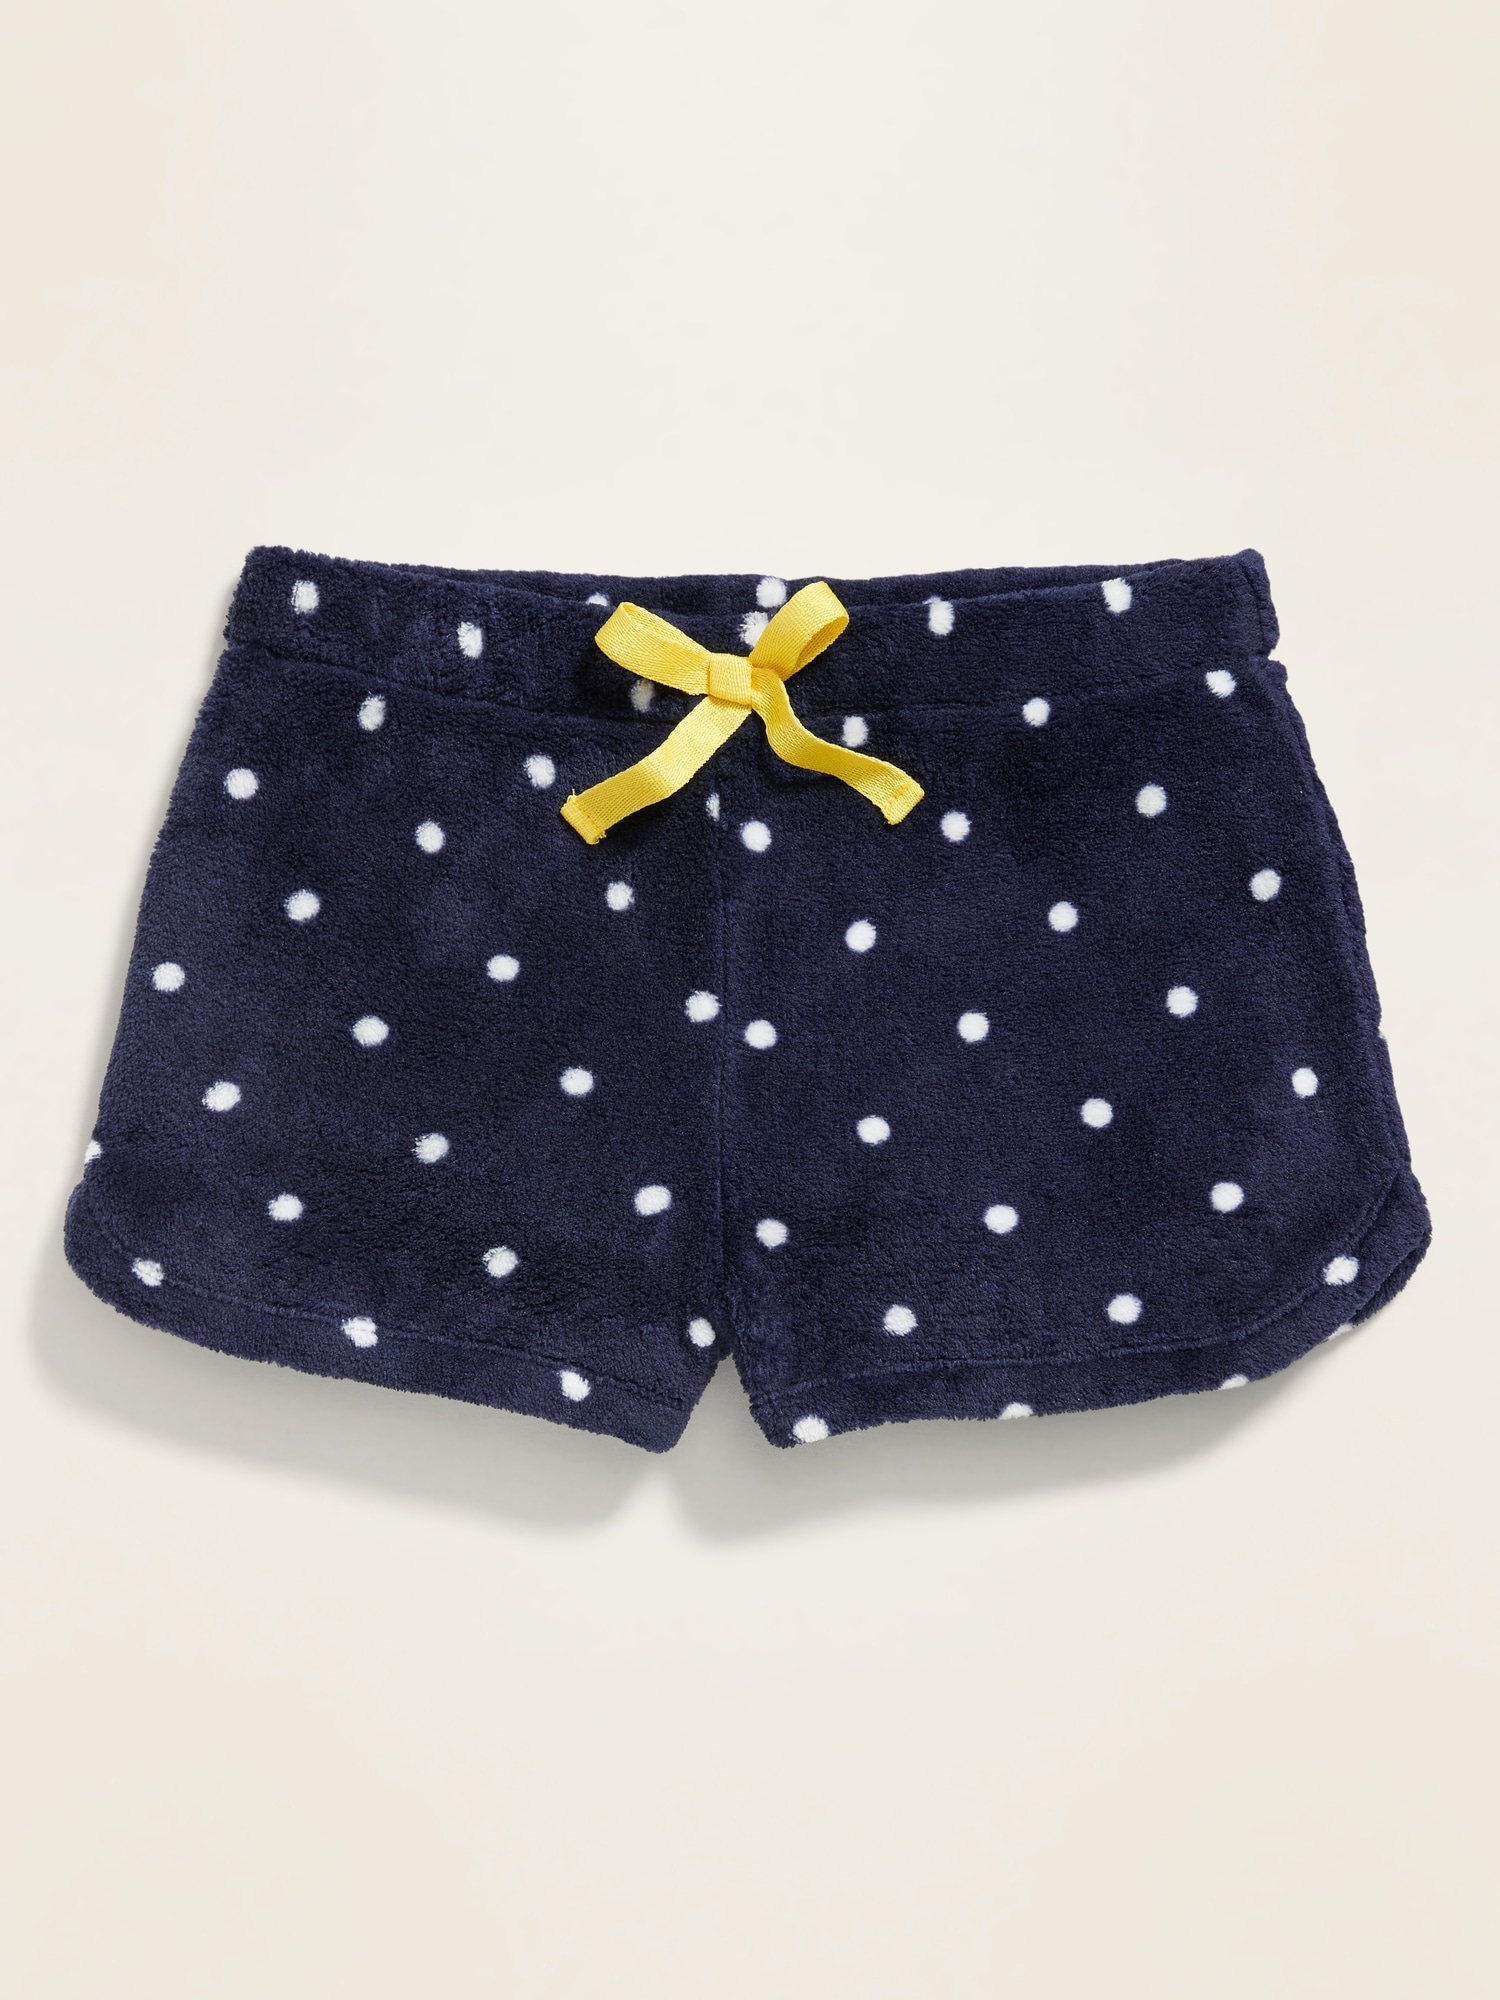 Soft-Twill Sleep Boxers for Women